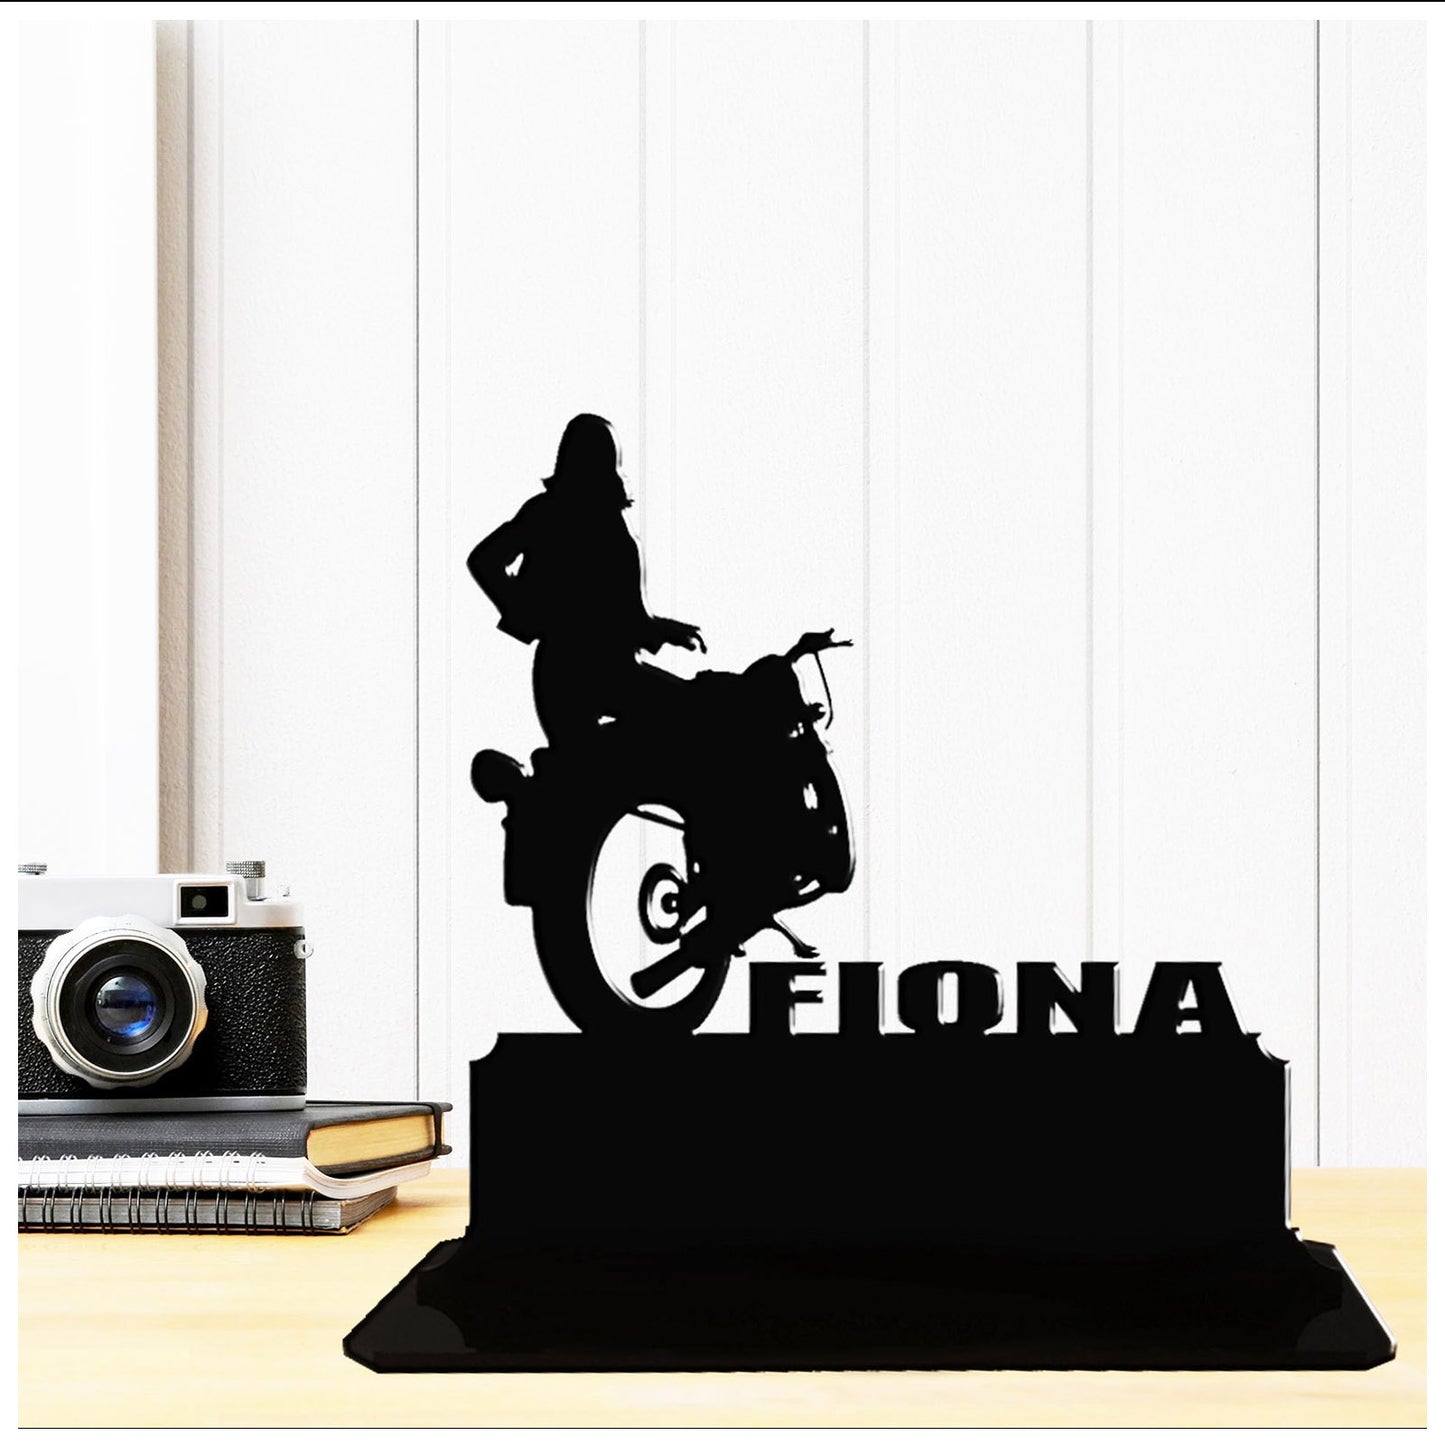 Acrylic personalized gifts for female motorcycle riders. Standalone keepsake ornaments.